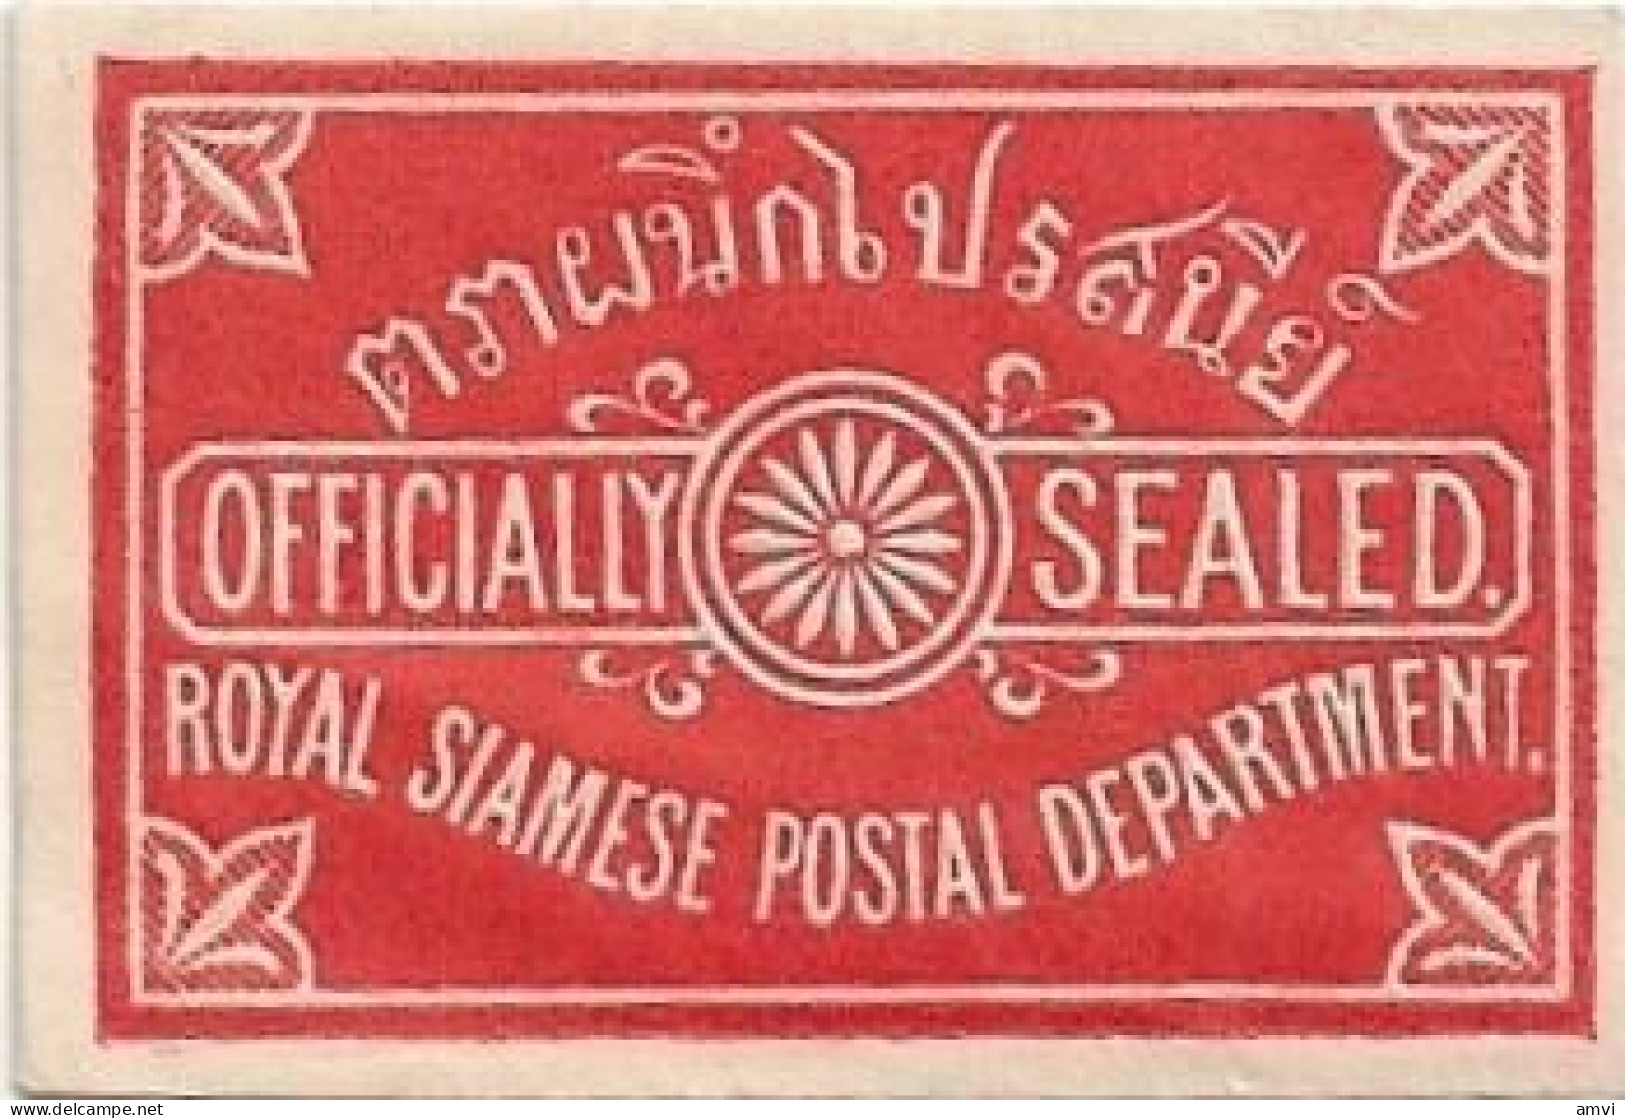 23-0724 Siam Officially Sealed Royal Siamese Postal Department - Thailand